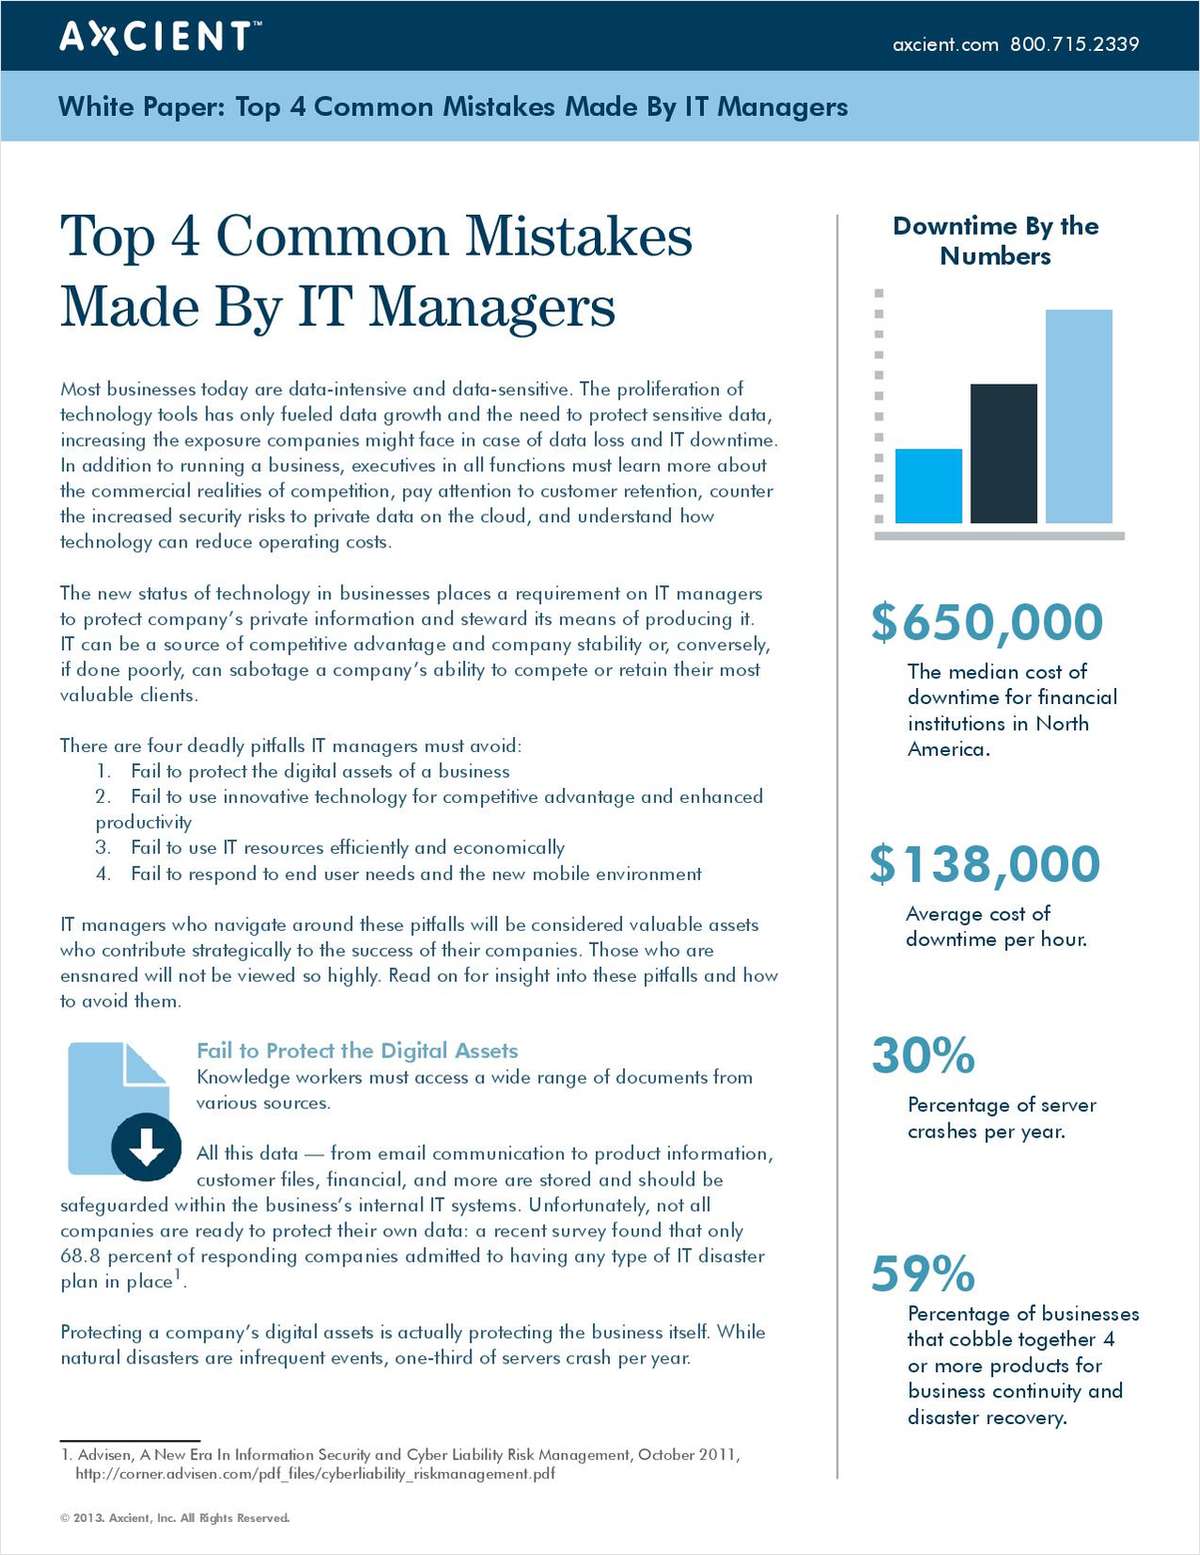 Top 4 Common Mistakes Made By IT Managers